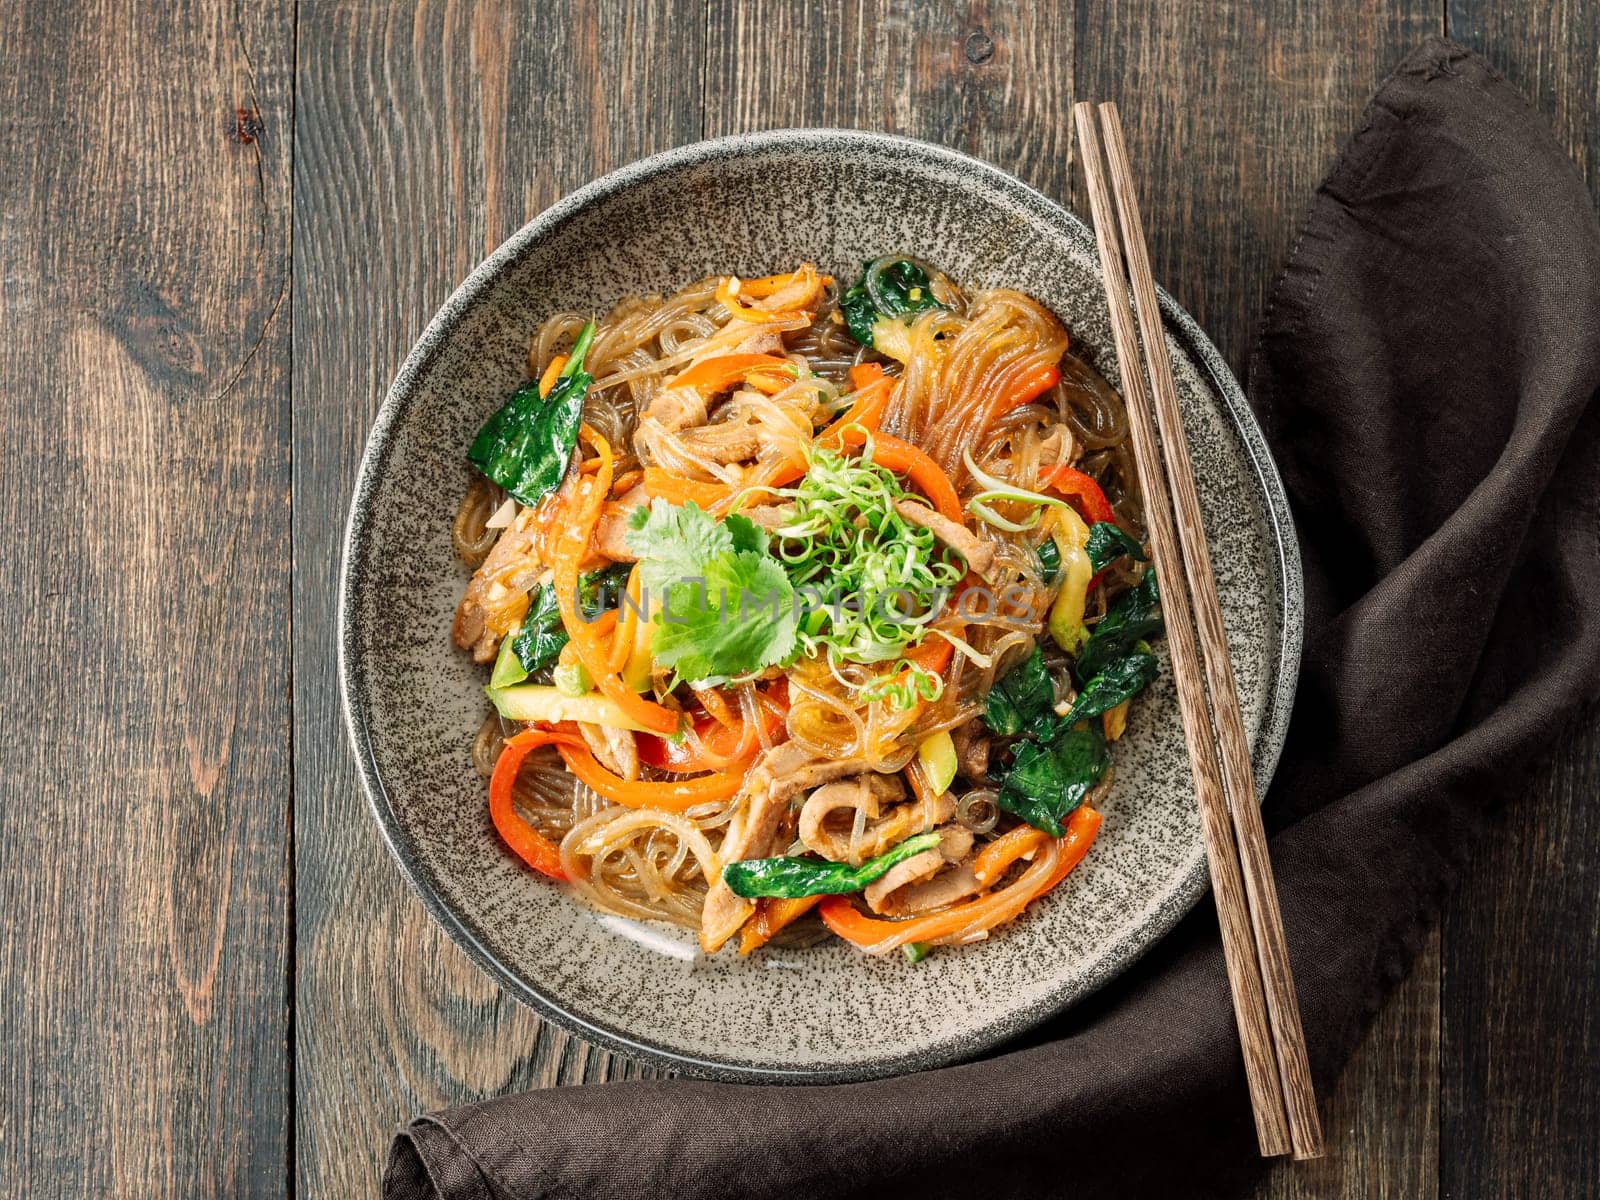 Asian noodles with meat and vegetables by fascinadora